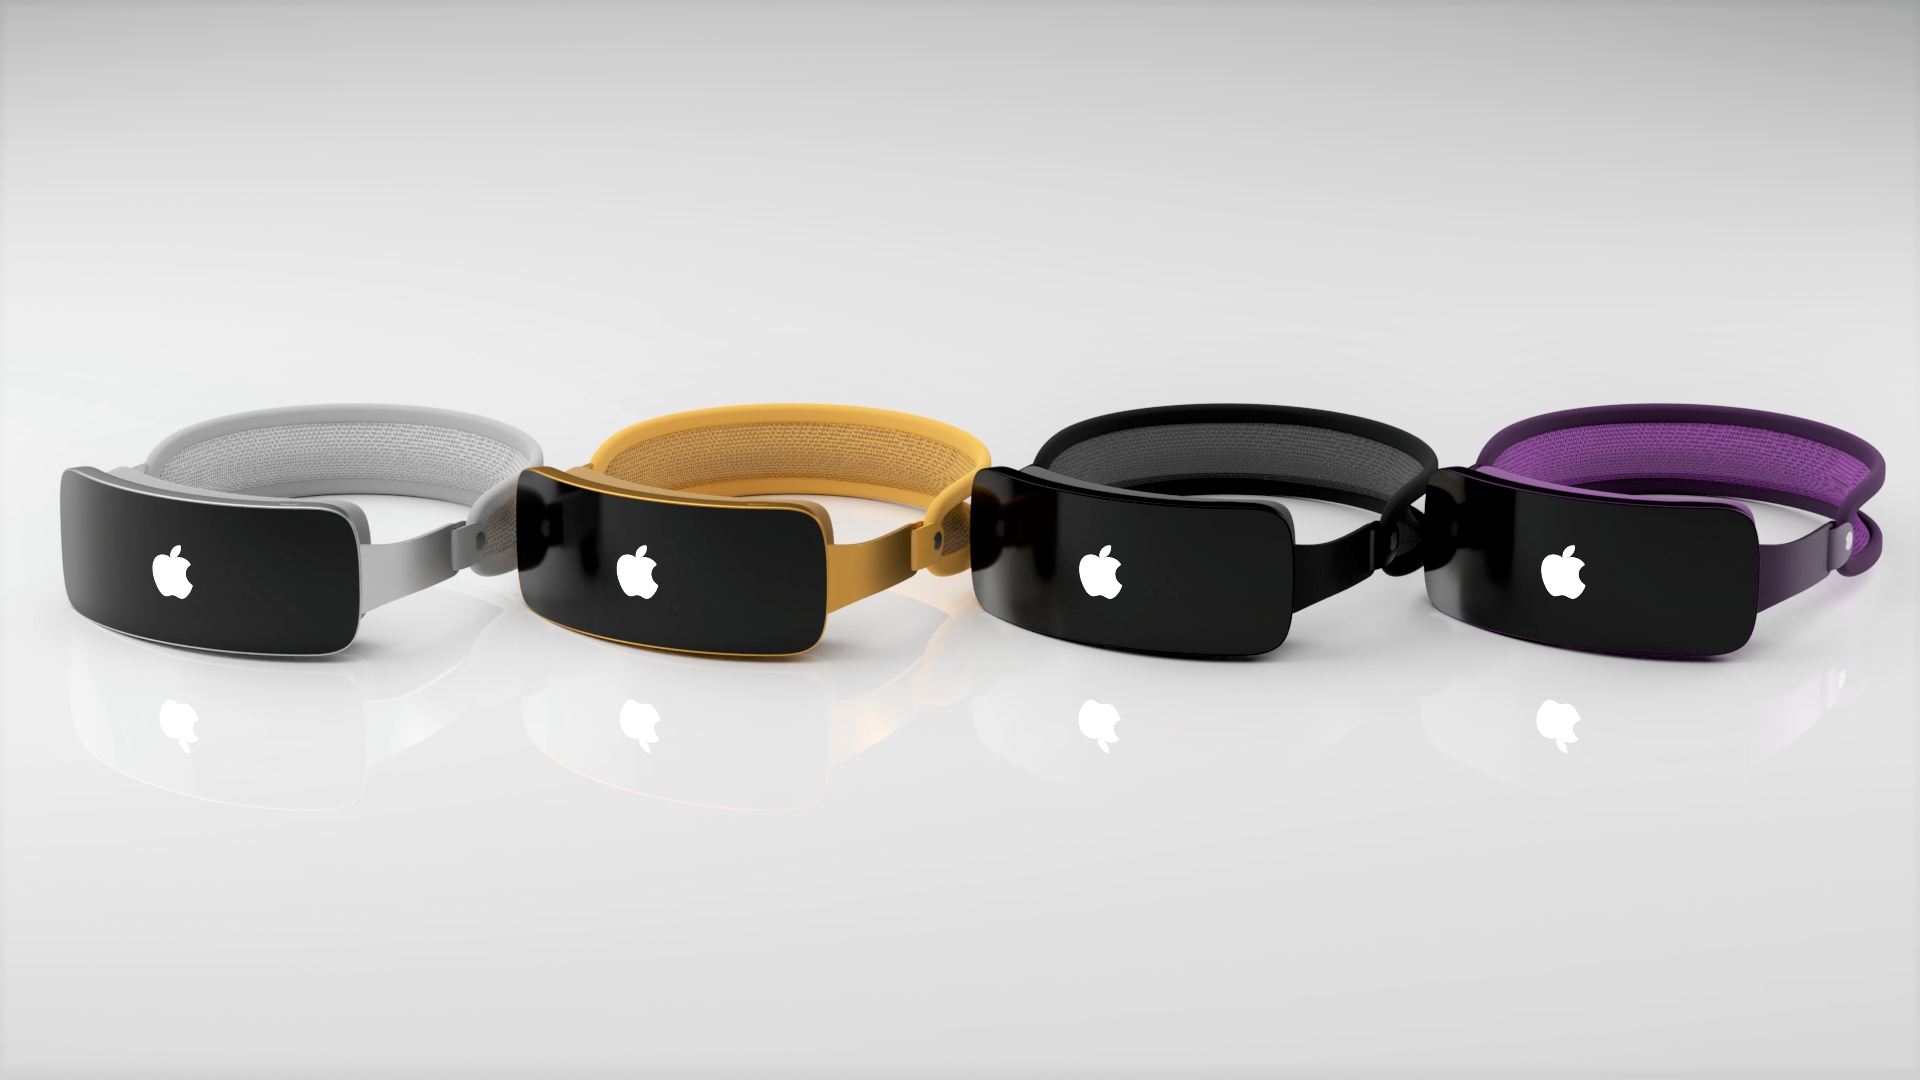 A more affordable Apple headset could come in high-end and low-end versions